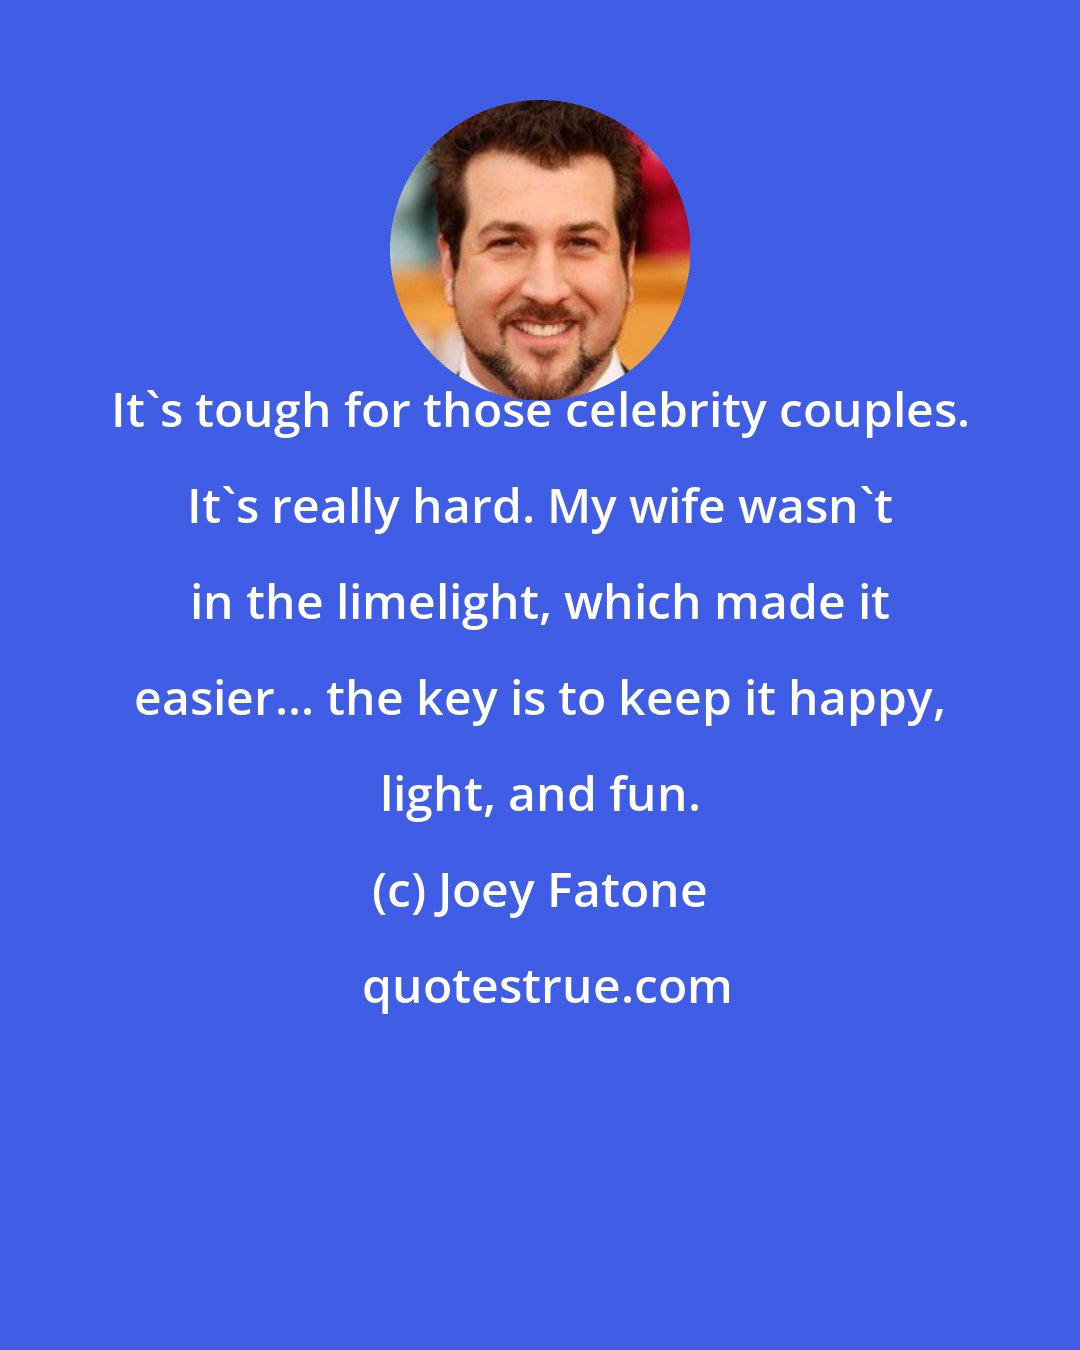 Joey Fatone: It's tough for those celebrity couples. It's really hard. My wife wasn't in the limelight, which made it easier... the key is to keep it happy, light, and fun.